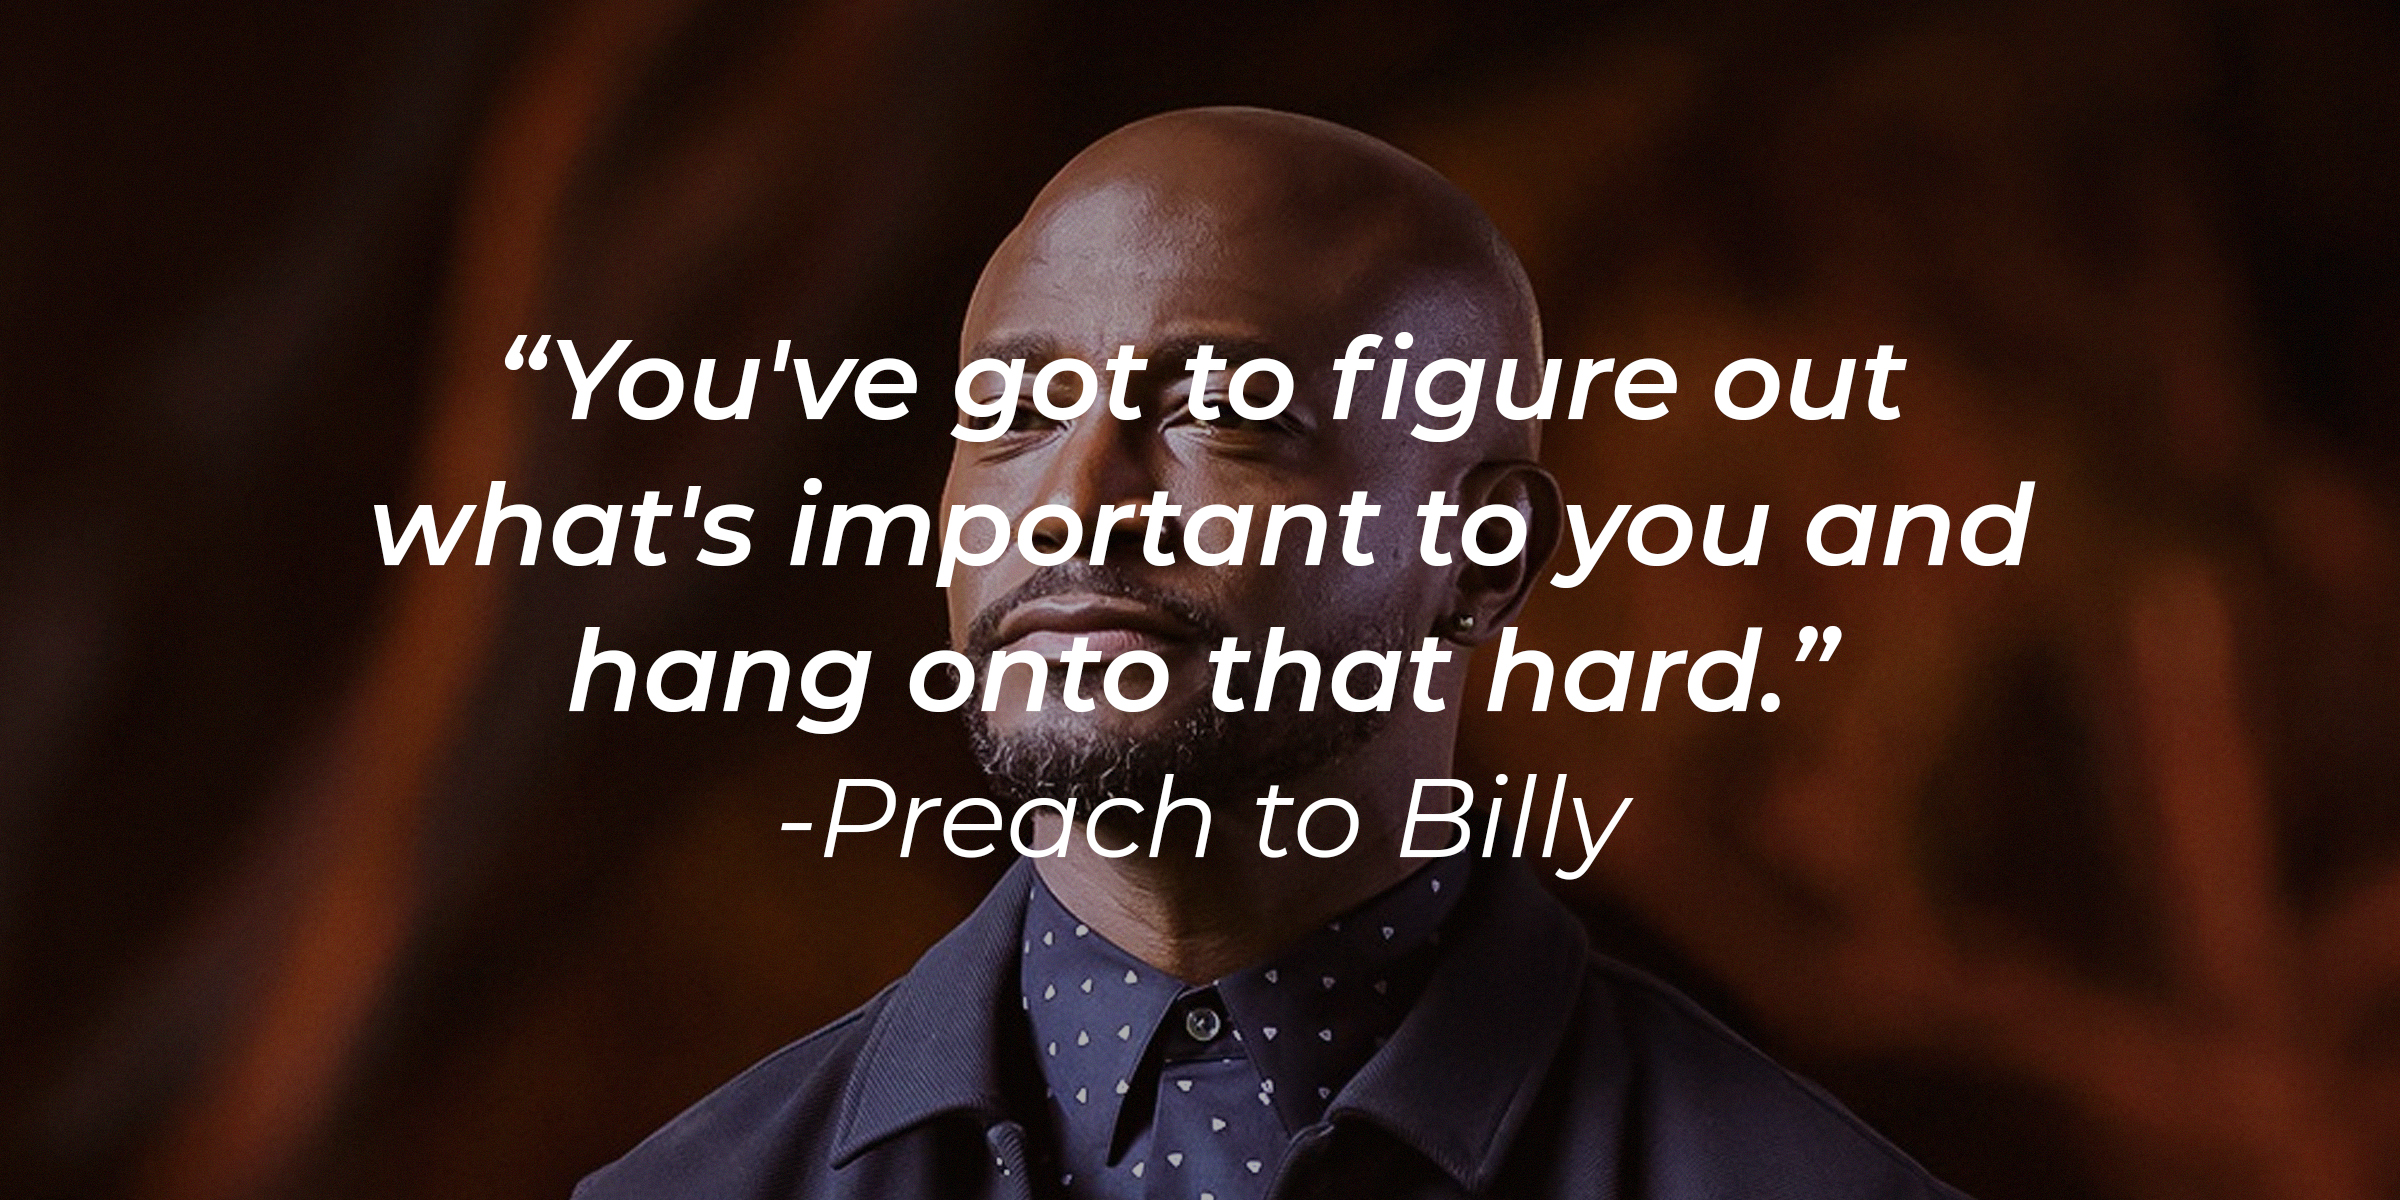 An image of Billy with a quote from Preach to him, "You've got to figure out what's important to you and hang onto that hard." | Source: facebook.com/CWAllAmerican